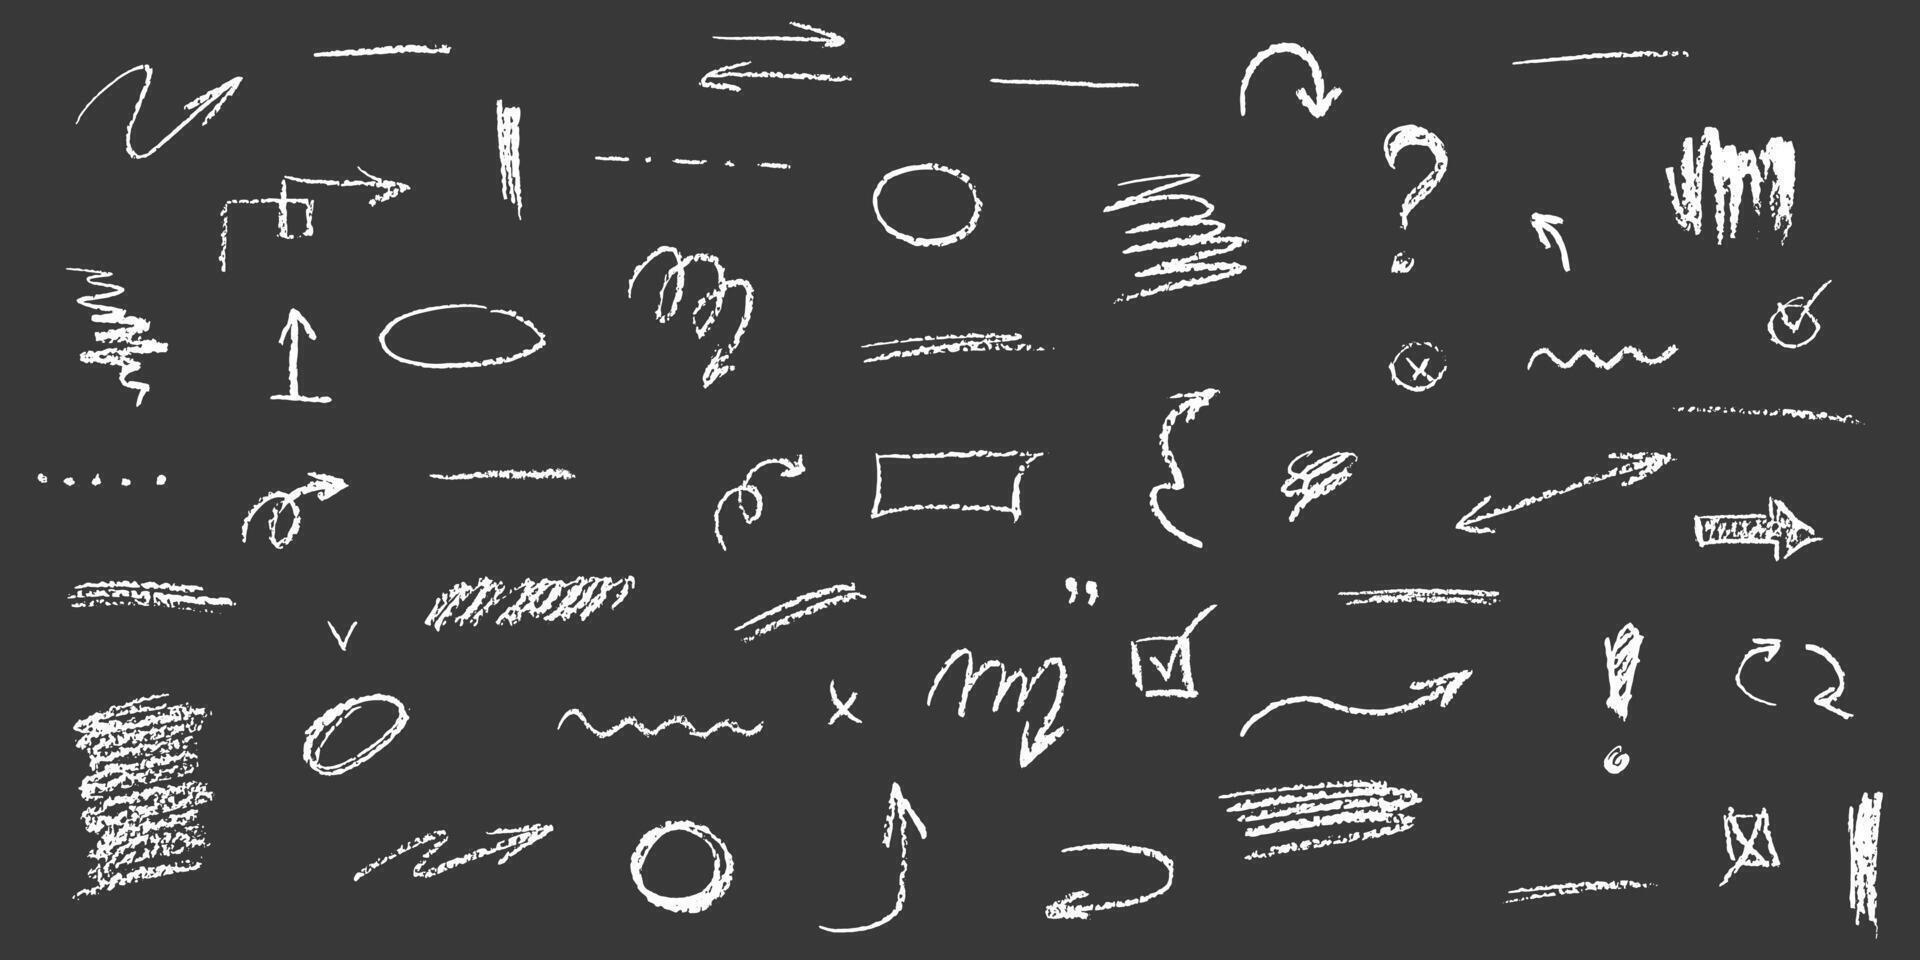 Charcoal elements vector set. Hand drawn underlines, different curved lines, swirls arrows and borders. Doodle marker drawing, chalk smears. Isolated freehand Scribbles and scrawls on black background